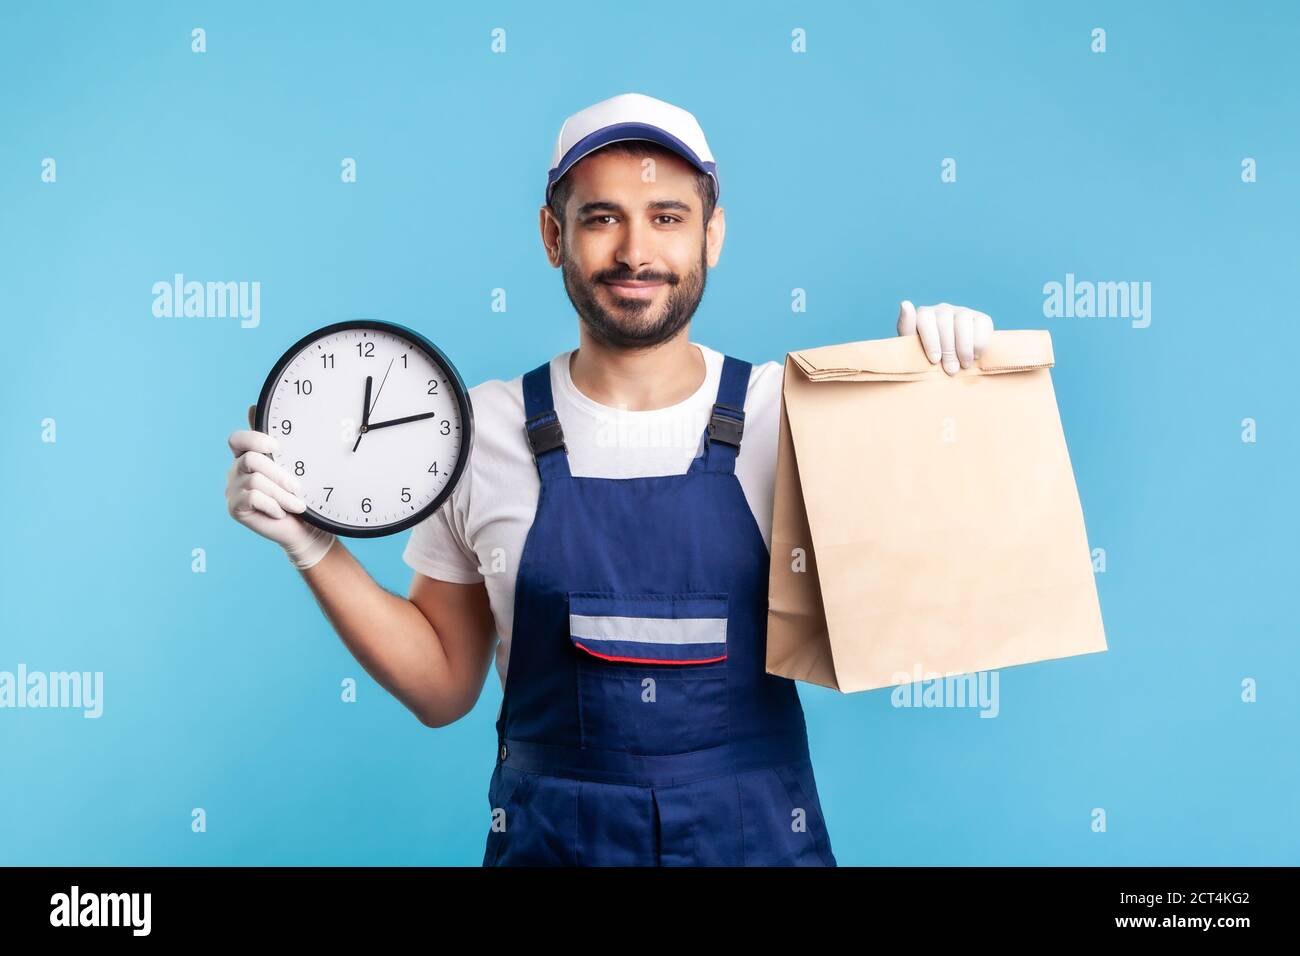 Food delivery, shipping on time! Portrait of handyman in uniform, gloves holding clock and parcel. Express courier transportation, post mail services. Stock Photo